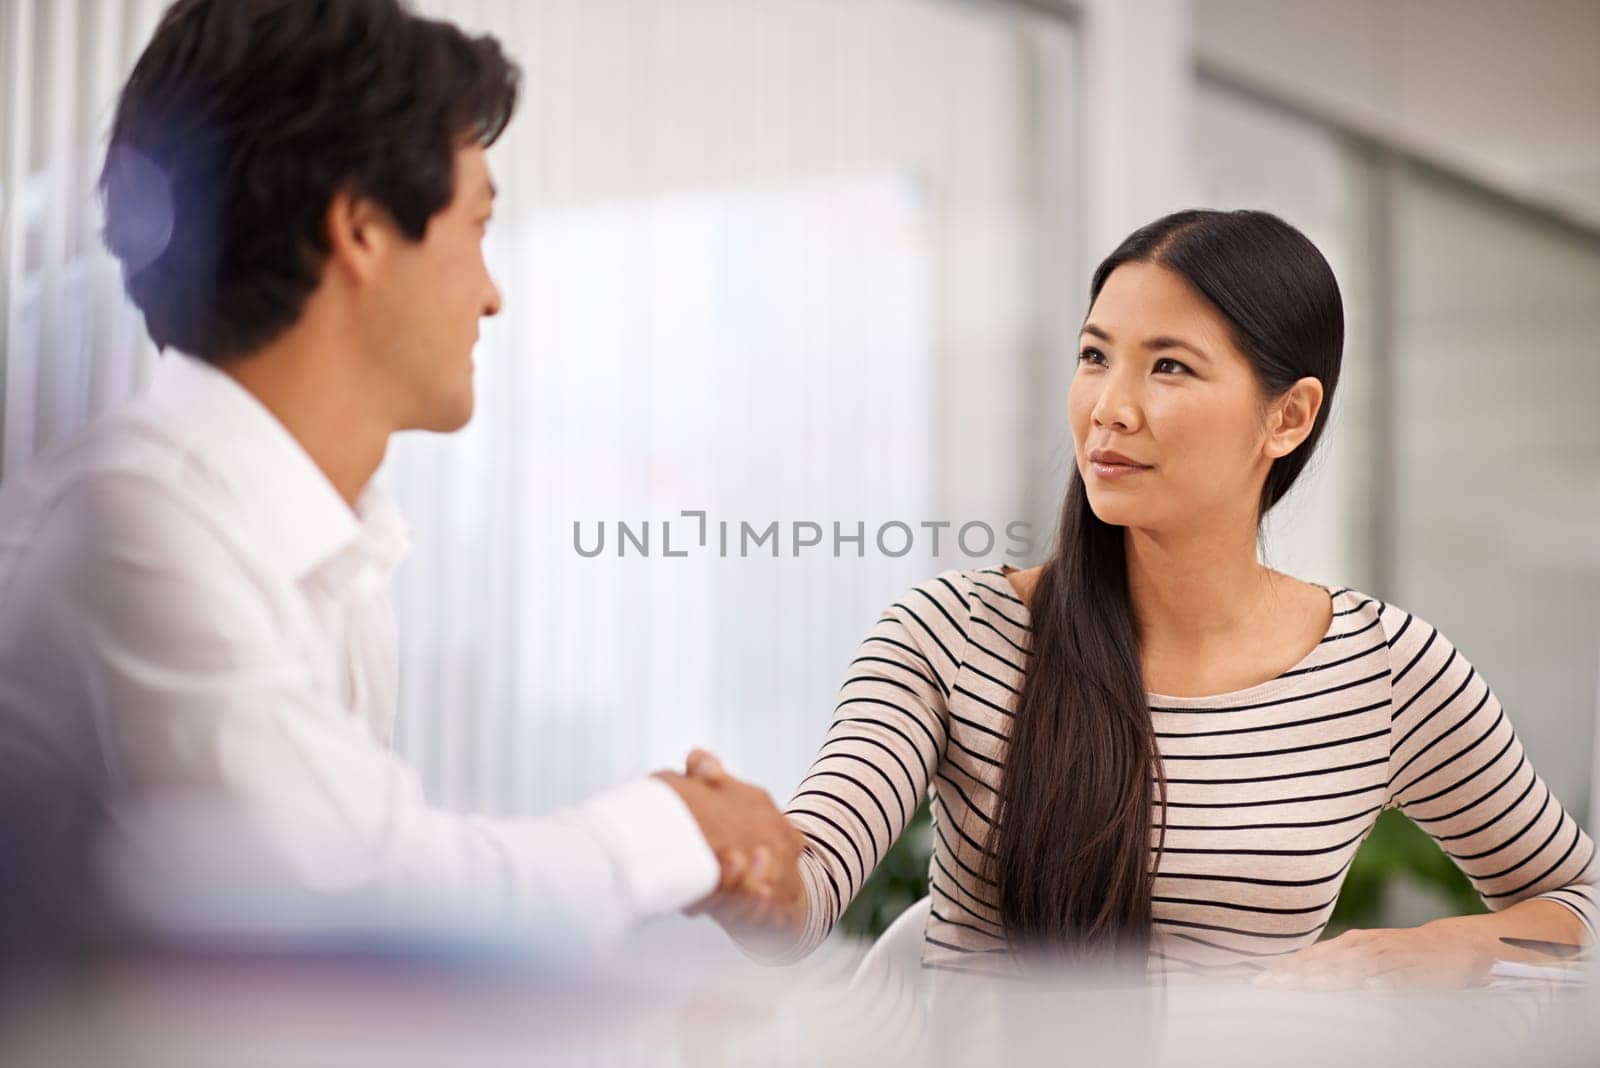 I think that went really well. two businesspeople shaking hands while seated in an office